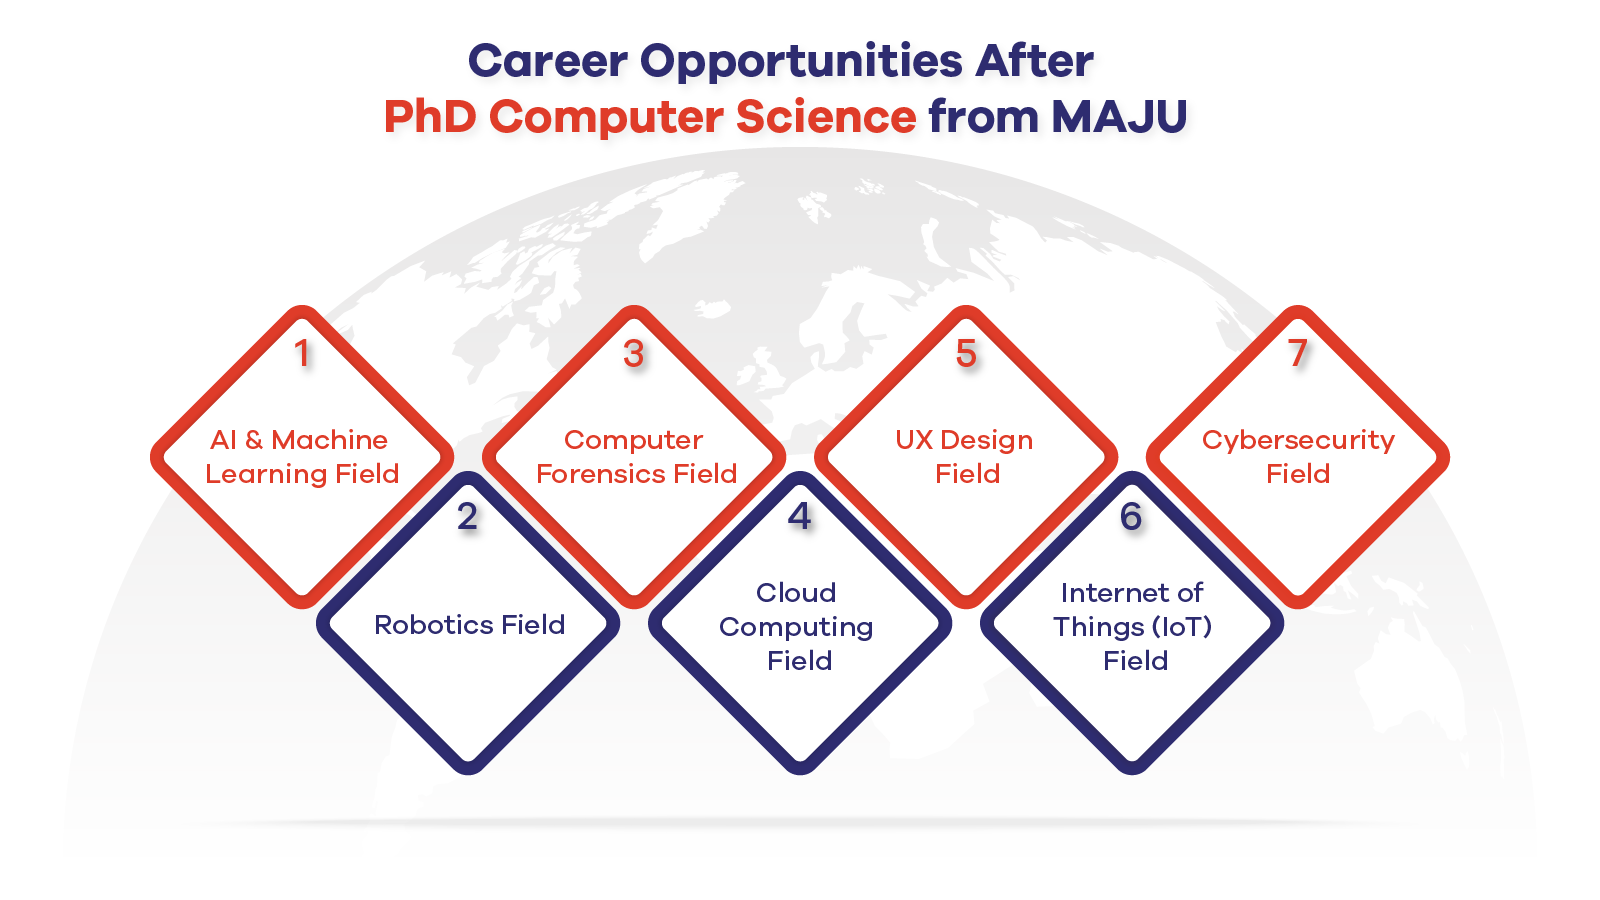 In-Demand Career Opportunities After PhD Computer Science from MAJU 